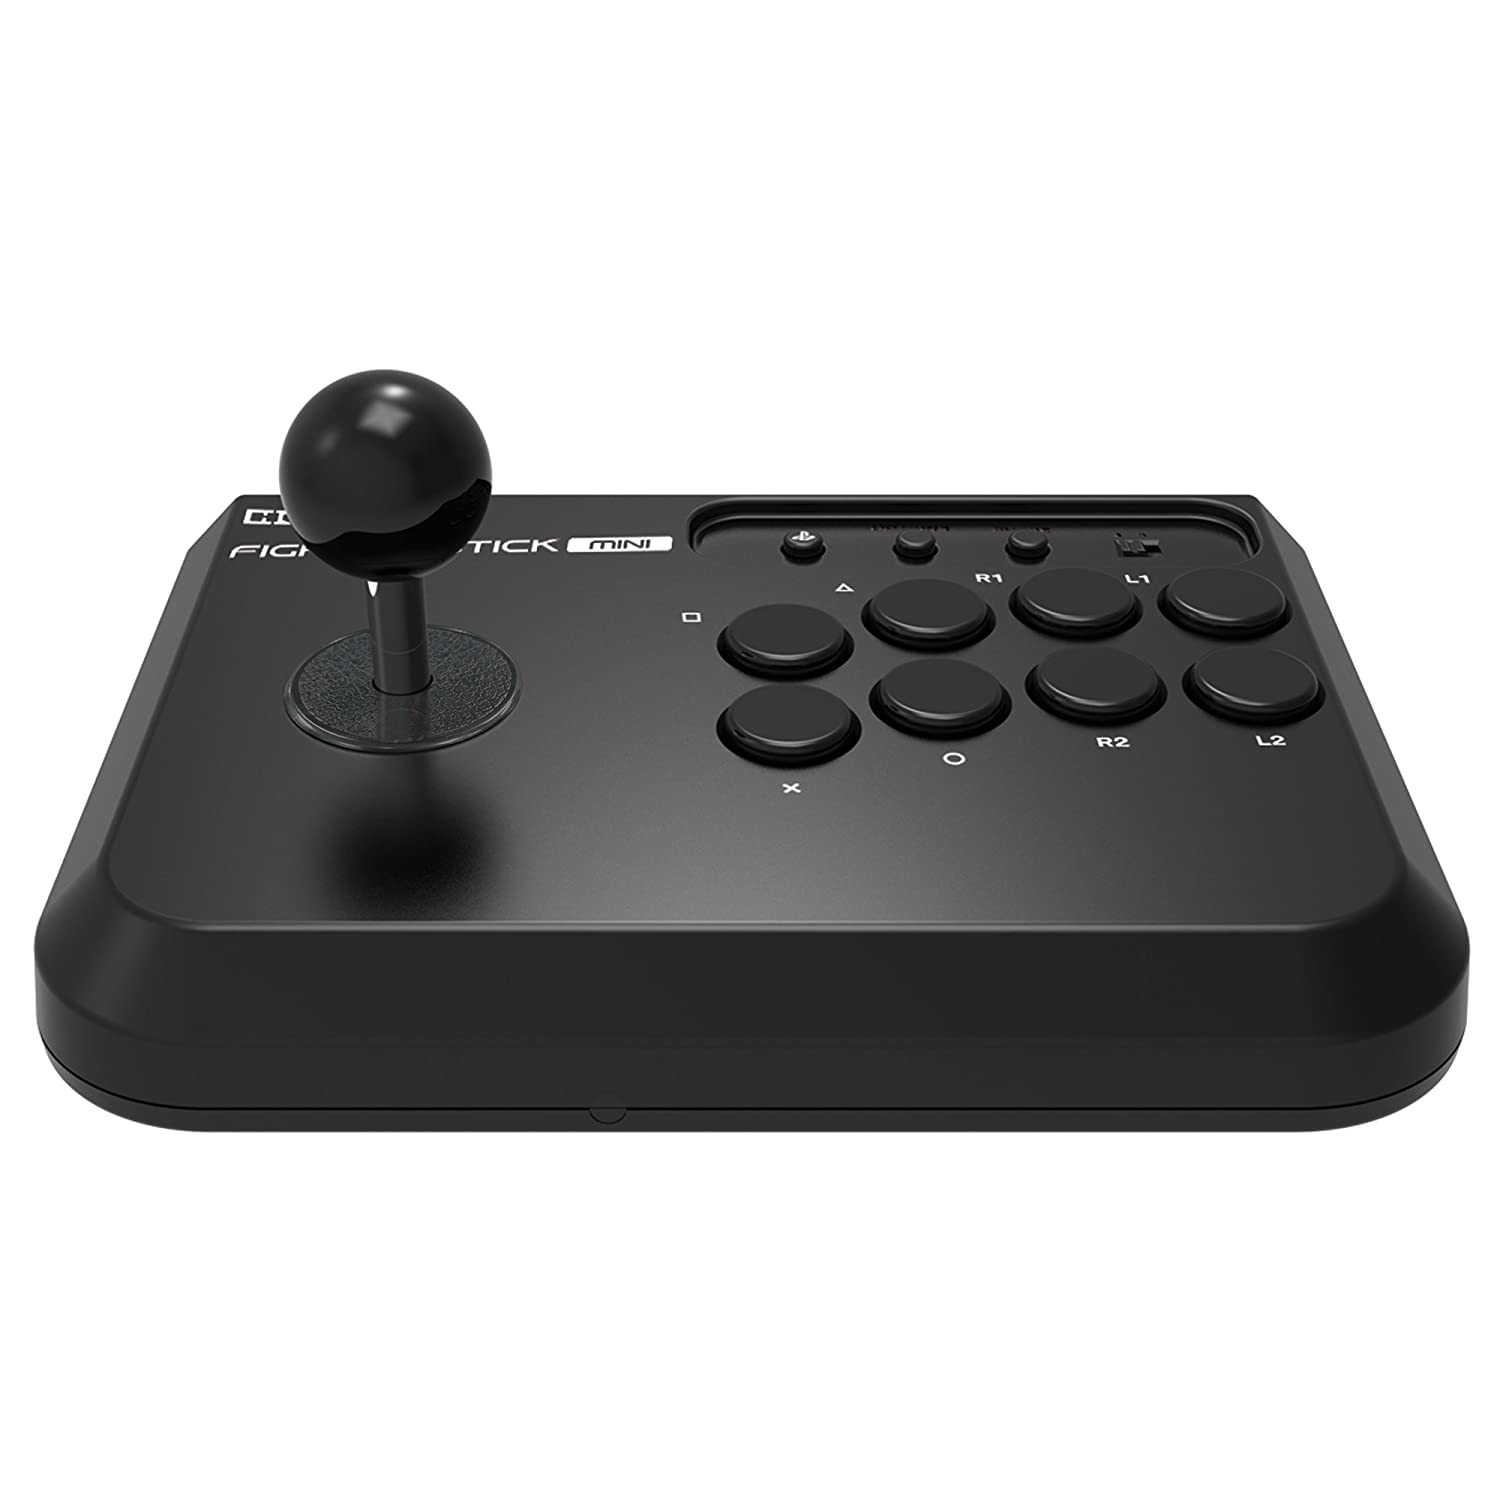 Which Fighting Game Controller Should You Buy? A Quick Rundown - CNET